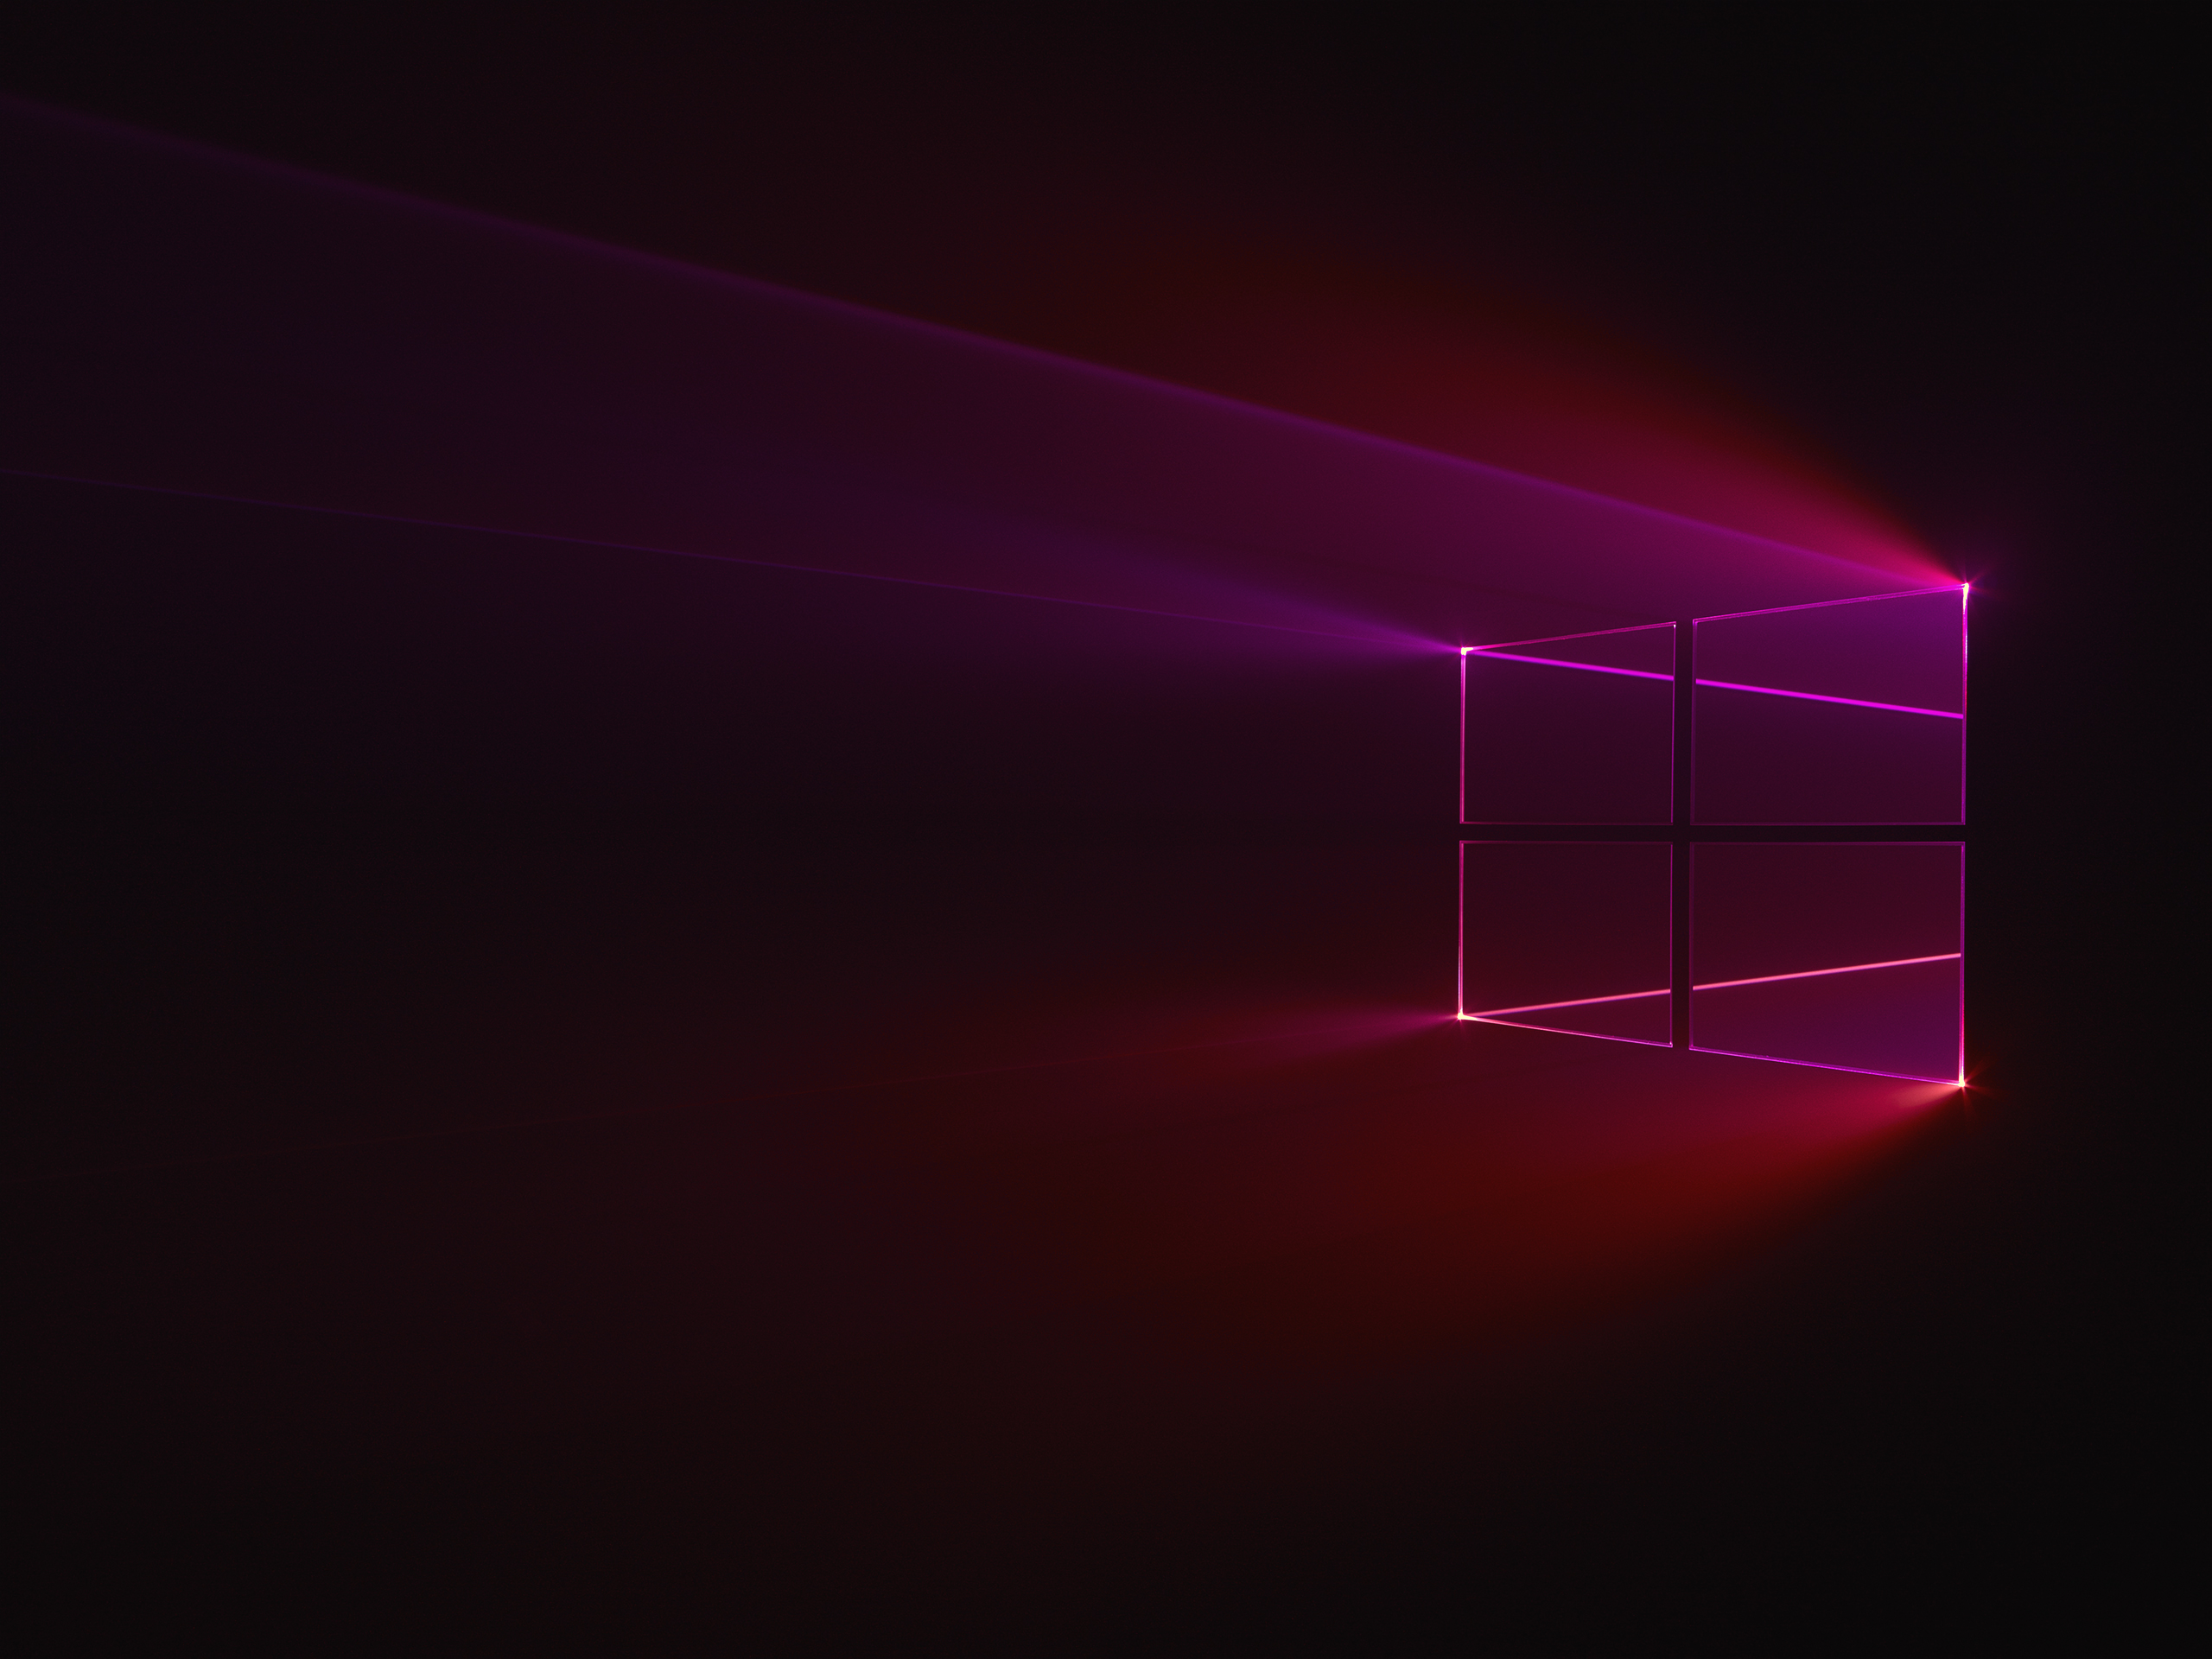 WIP versions of Windows 10 desktop background with light being filtered through a physical windows 10 logo